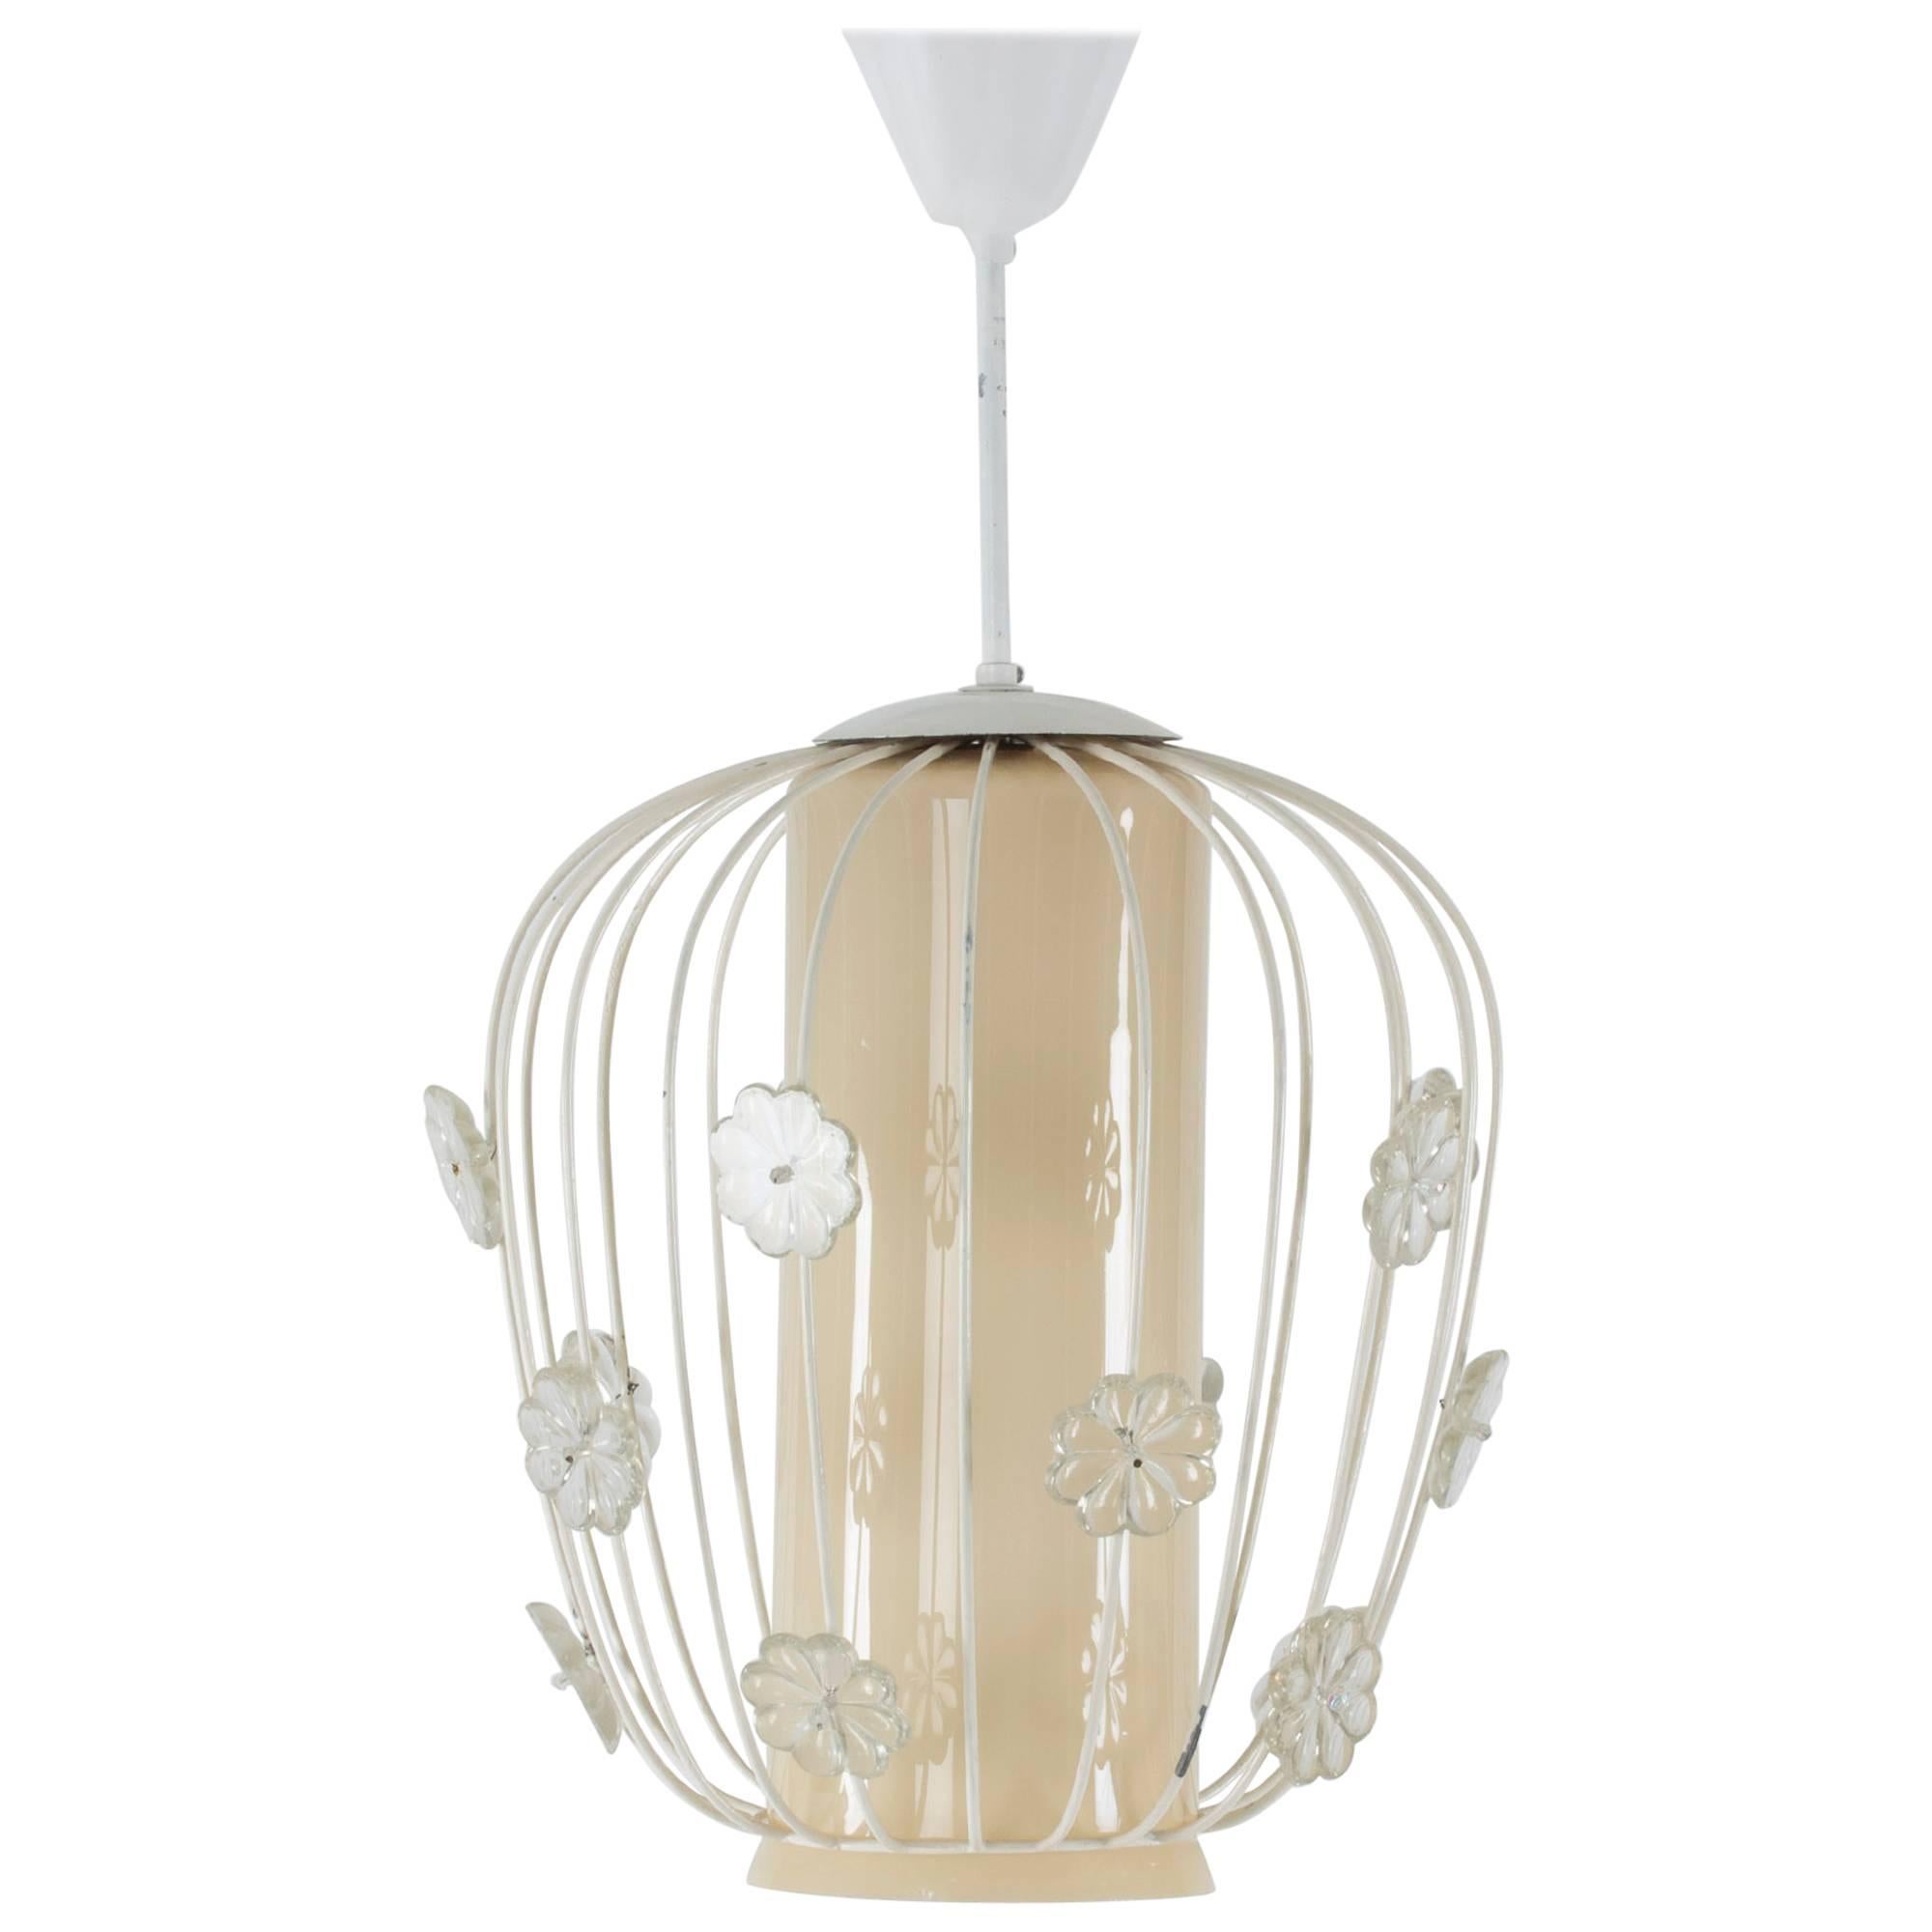 Swedish 1950s Glass and Lacquered Metal Ceiling Lamp